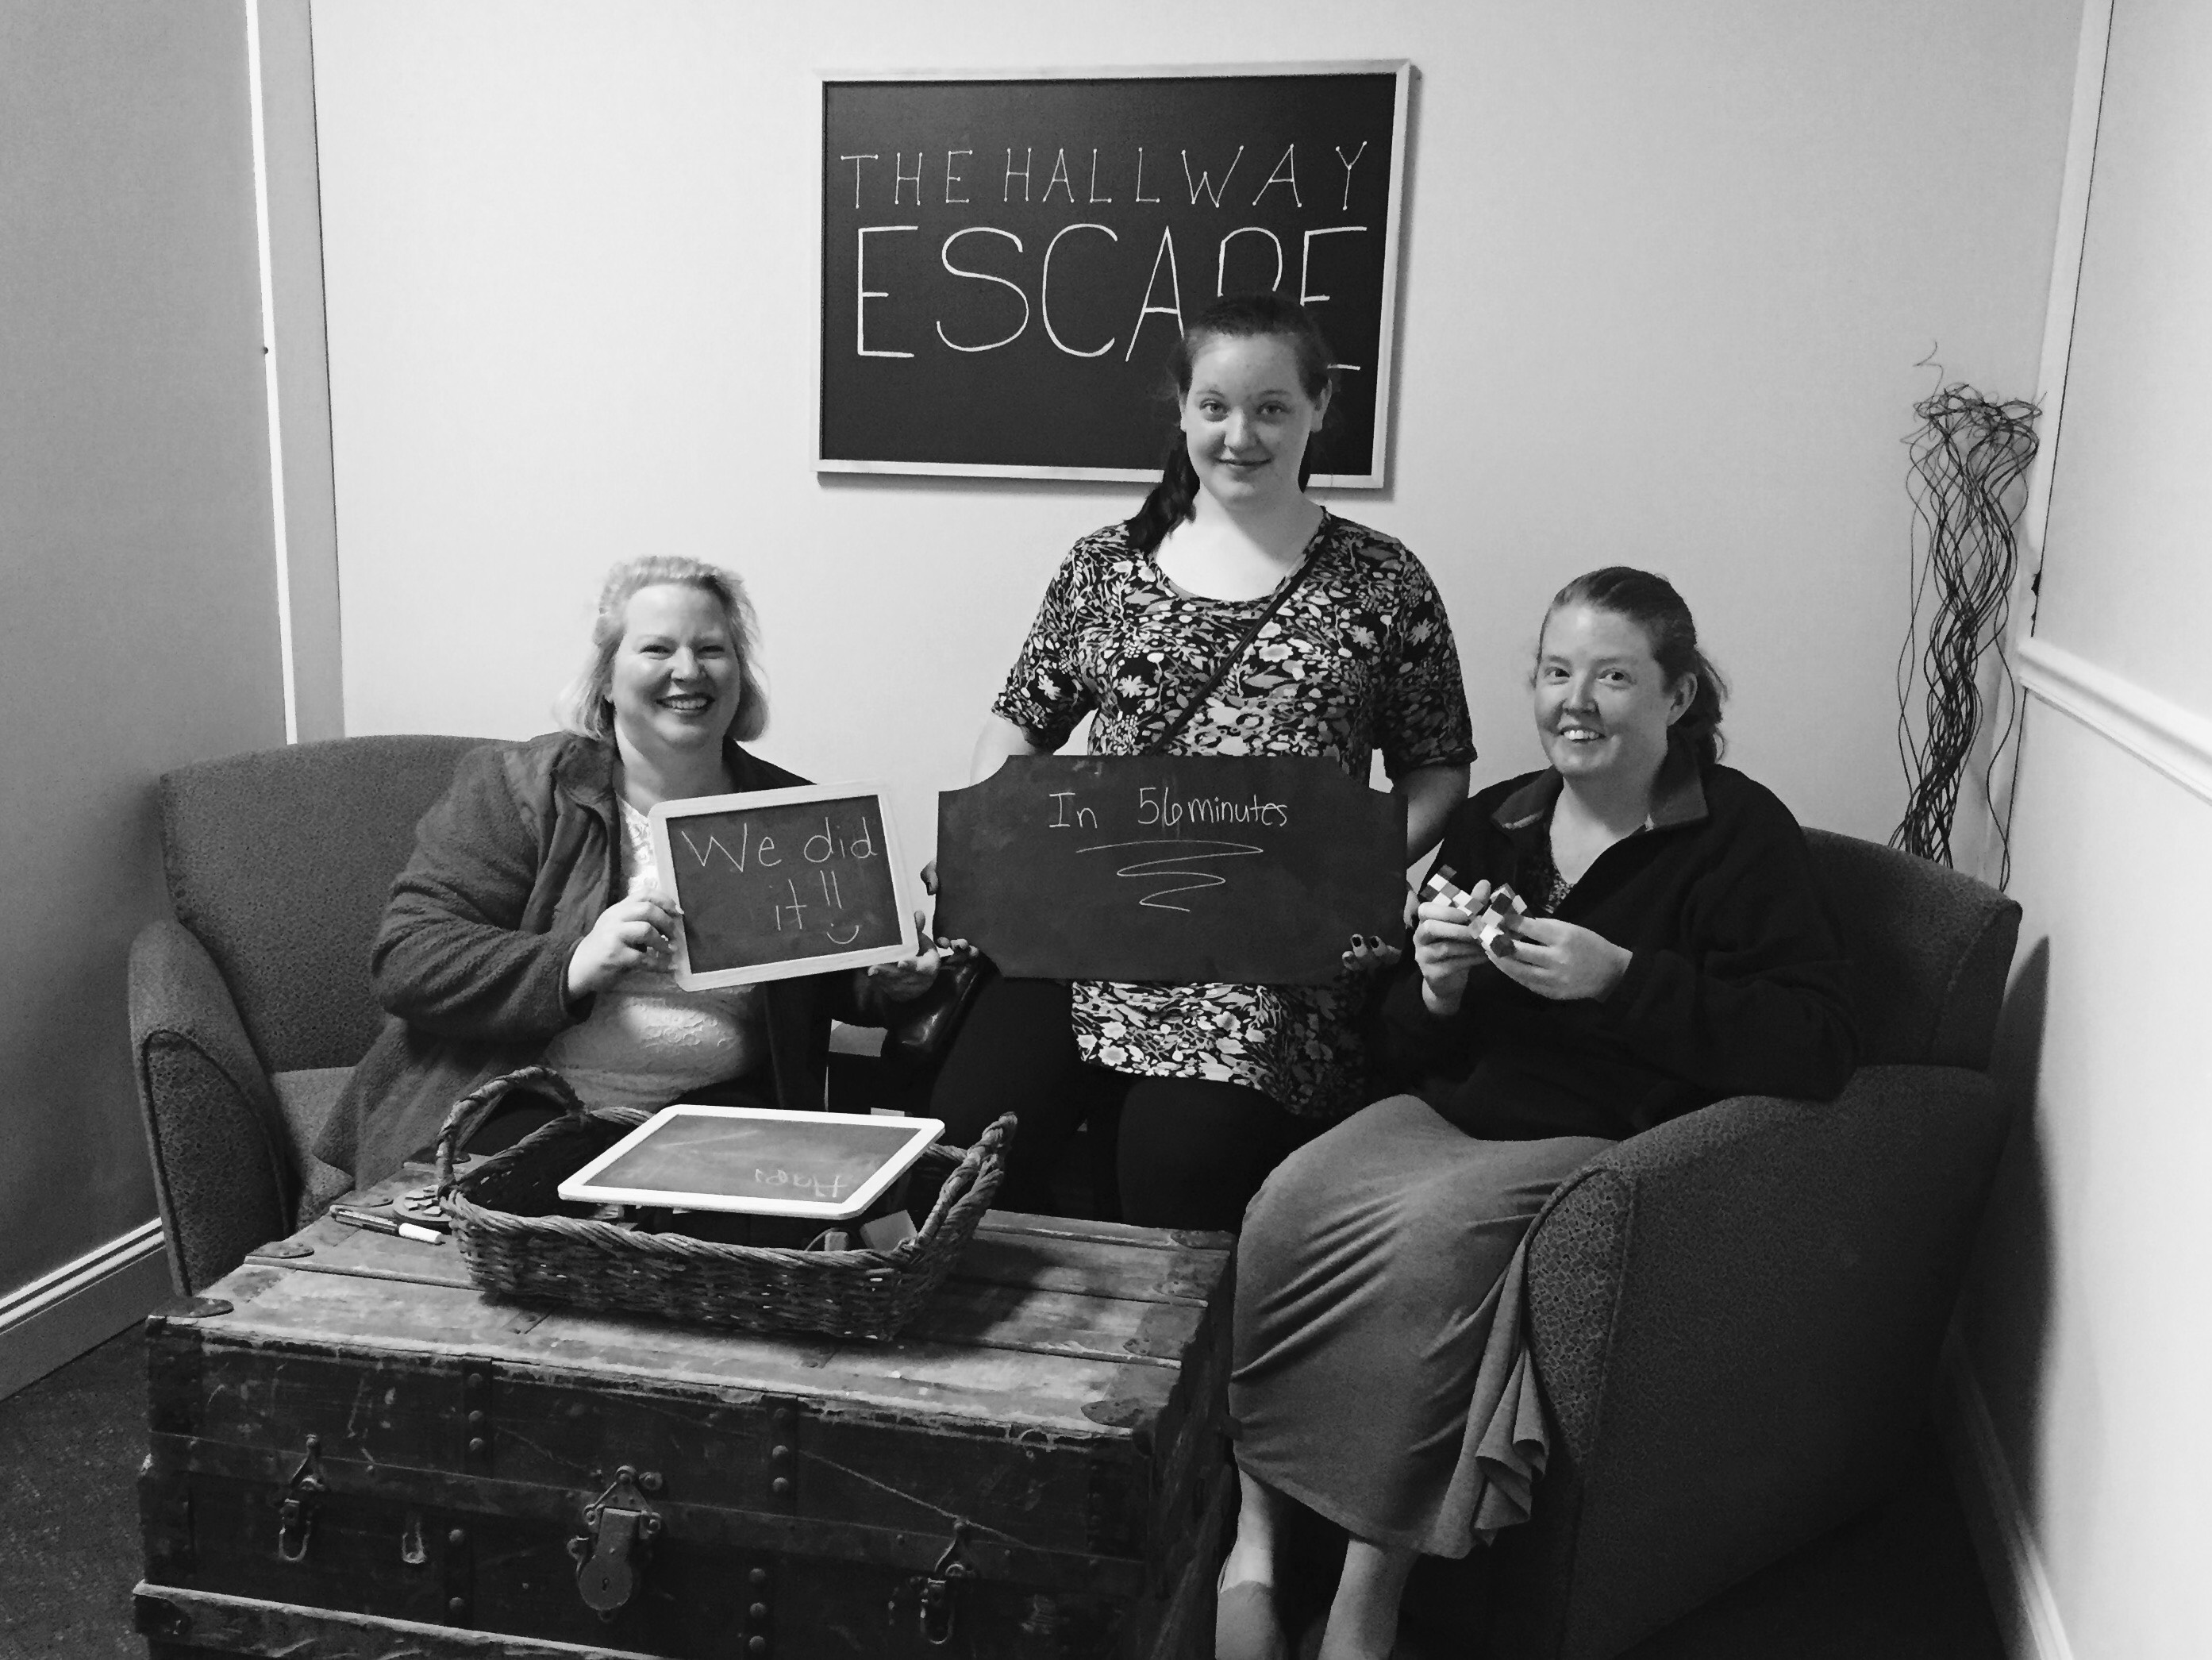 These ladies managed to solve the puzzle and escape with a few minutes to spare